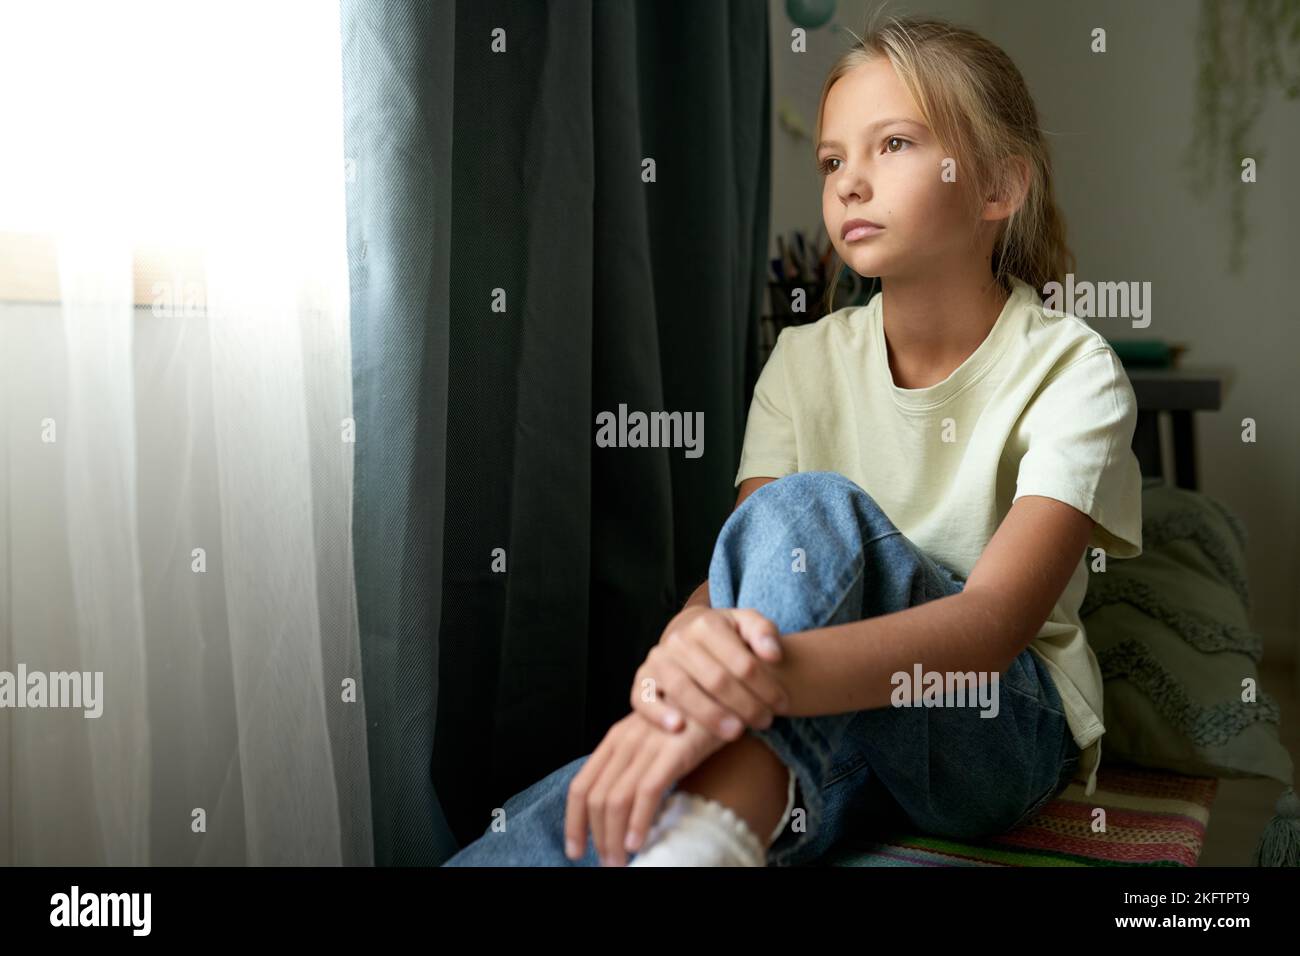 Sad little girl sitting alone in her room and looking at window with pensive expression Stock Photo